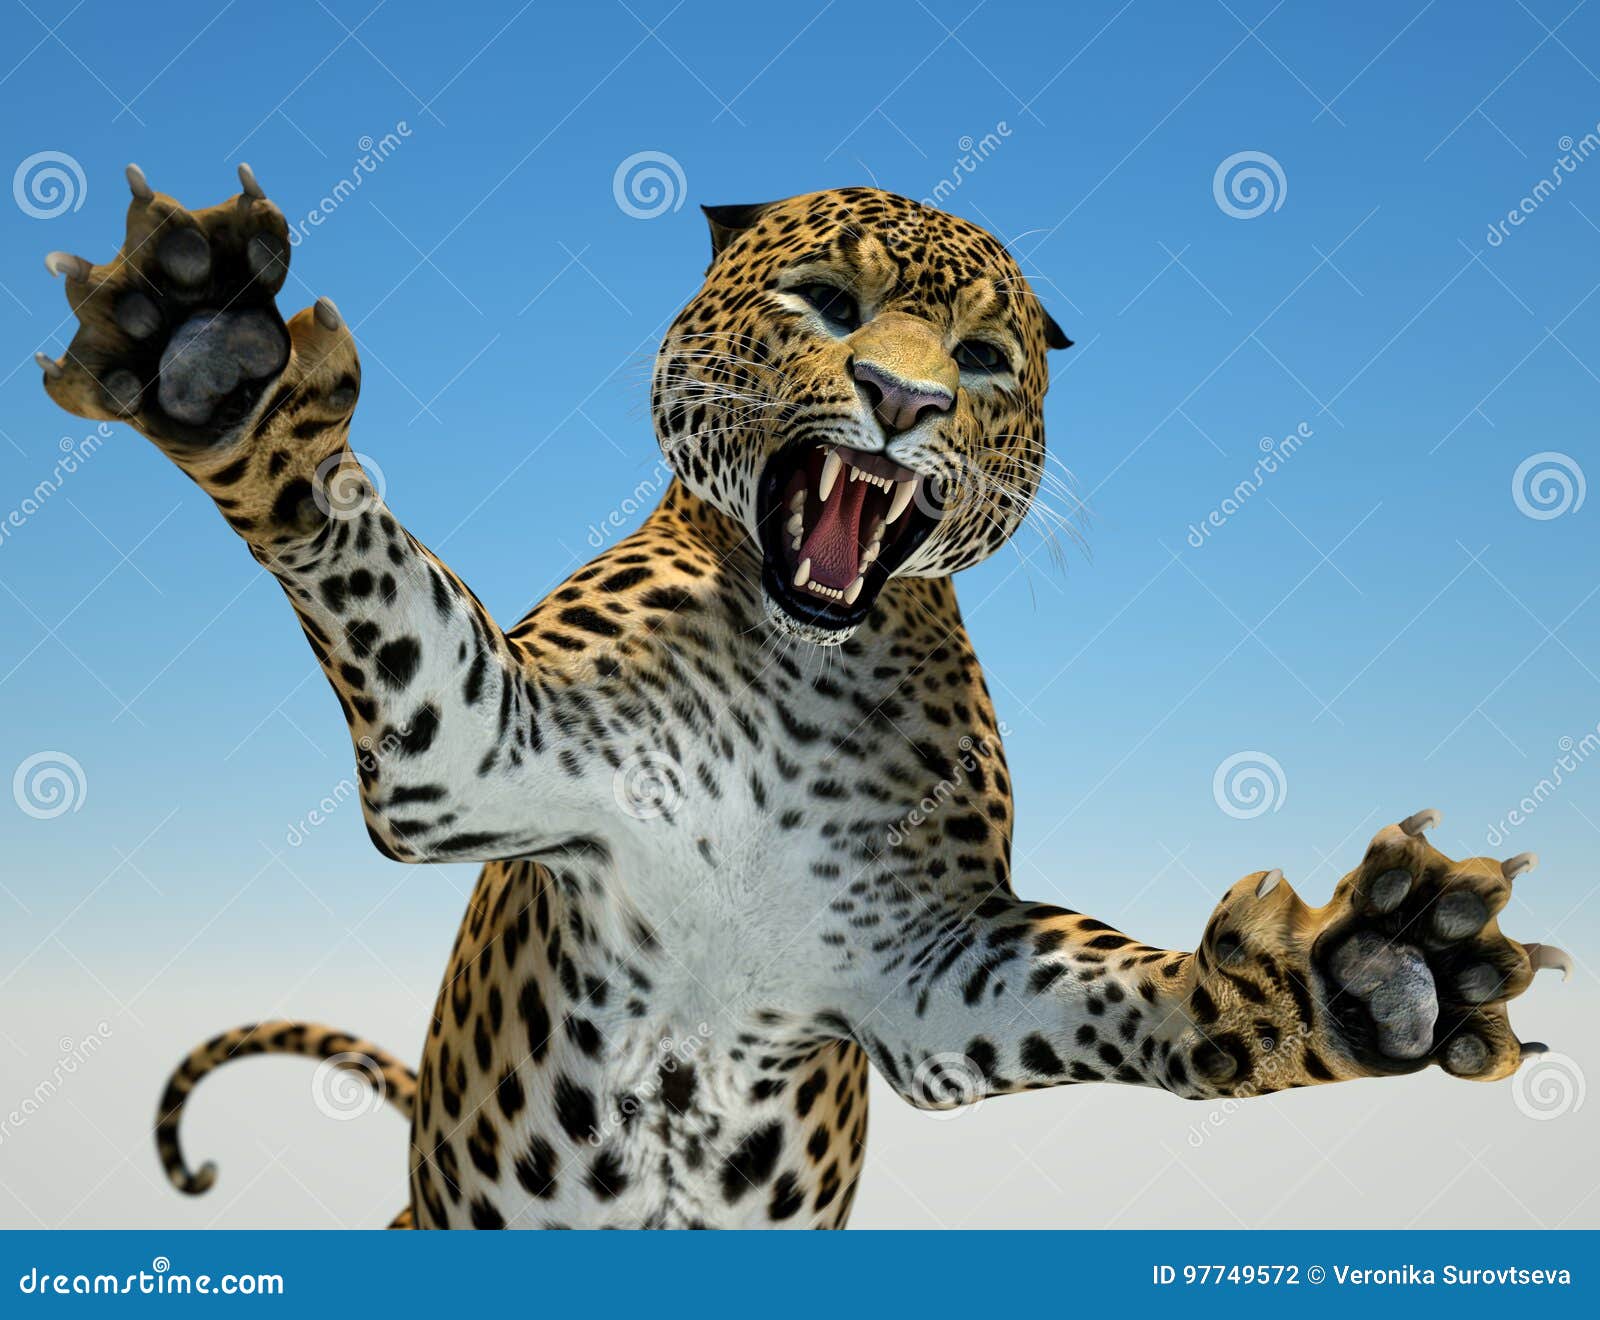 big-cat-hunting-d-render-beautiful-angry-roaring-puma-s-paws-expanded-97749572.jpg